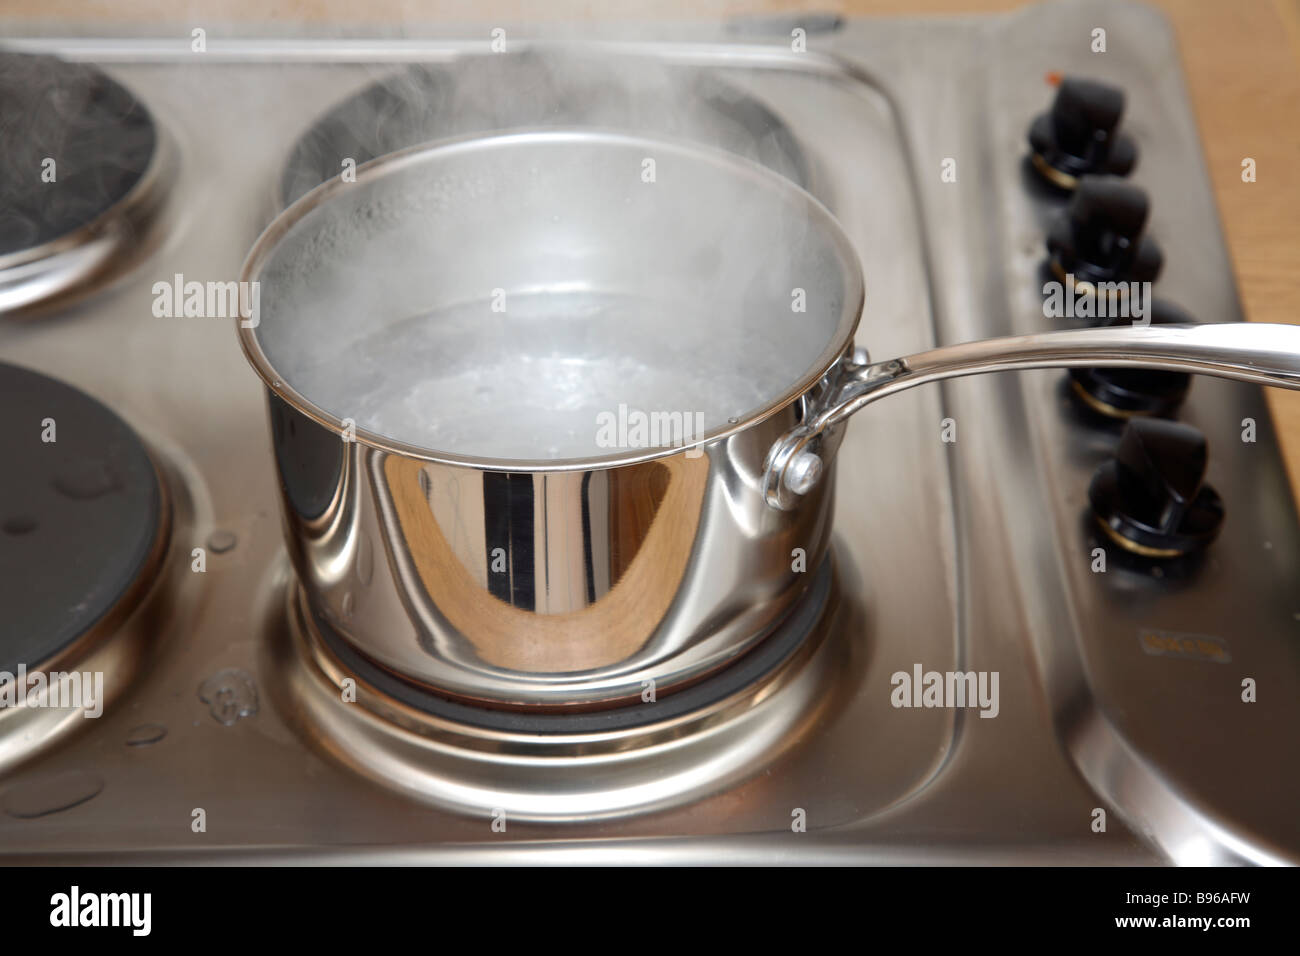 A stainless steel sausepan with steam. Stock Photo